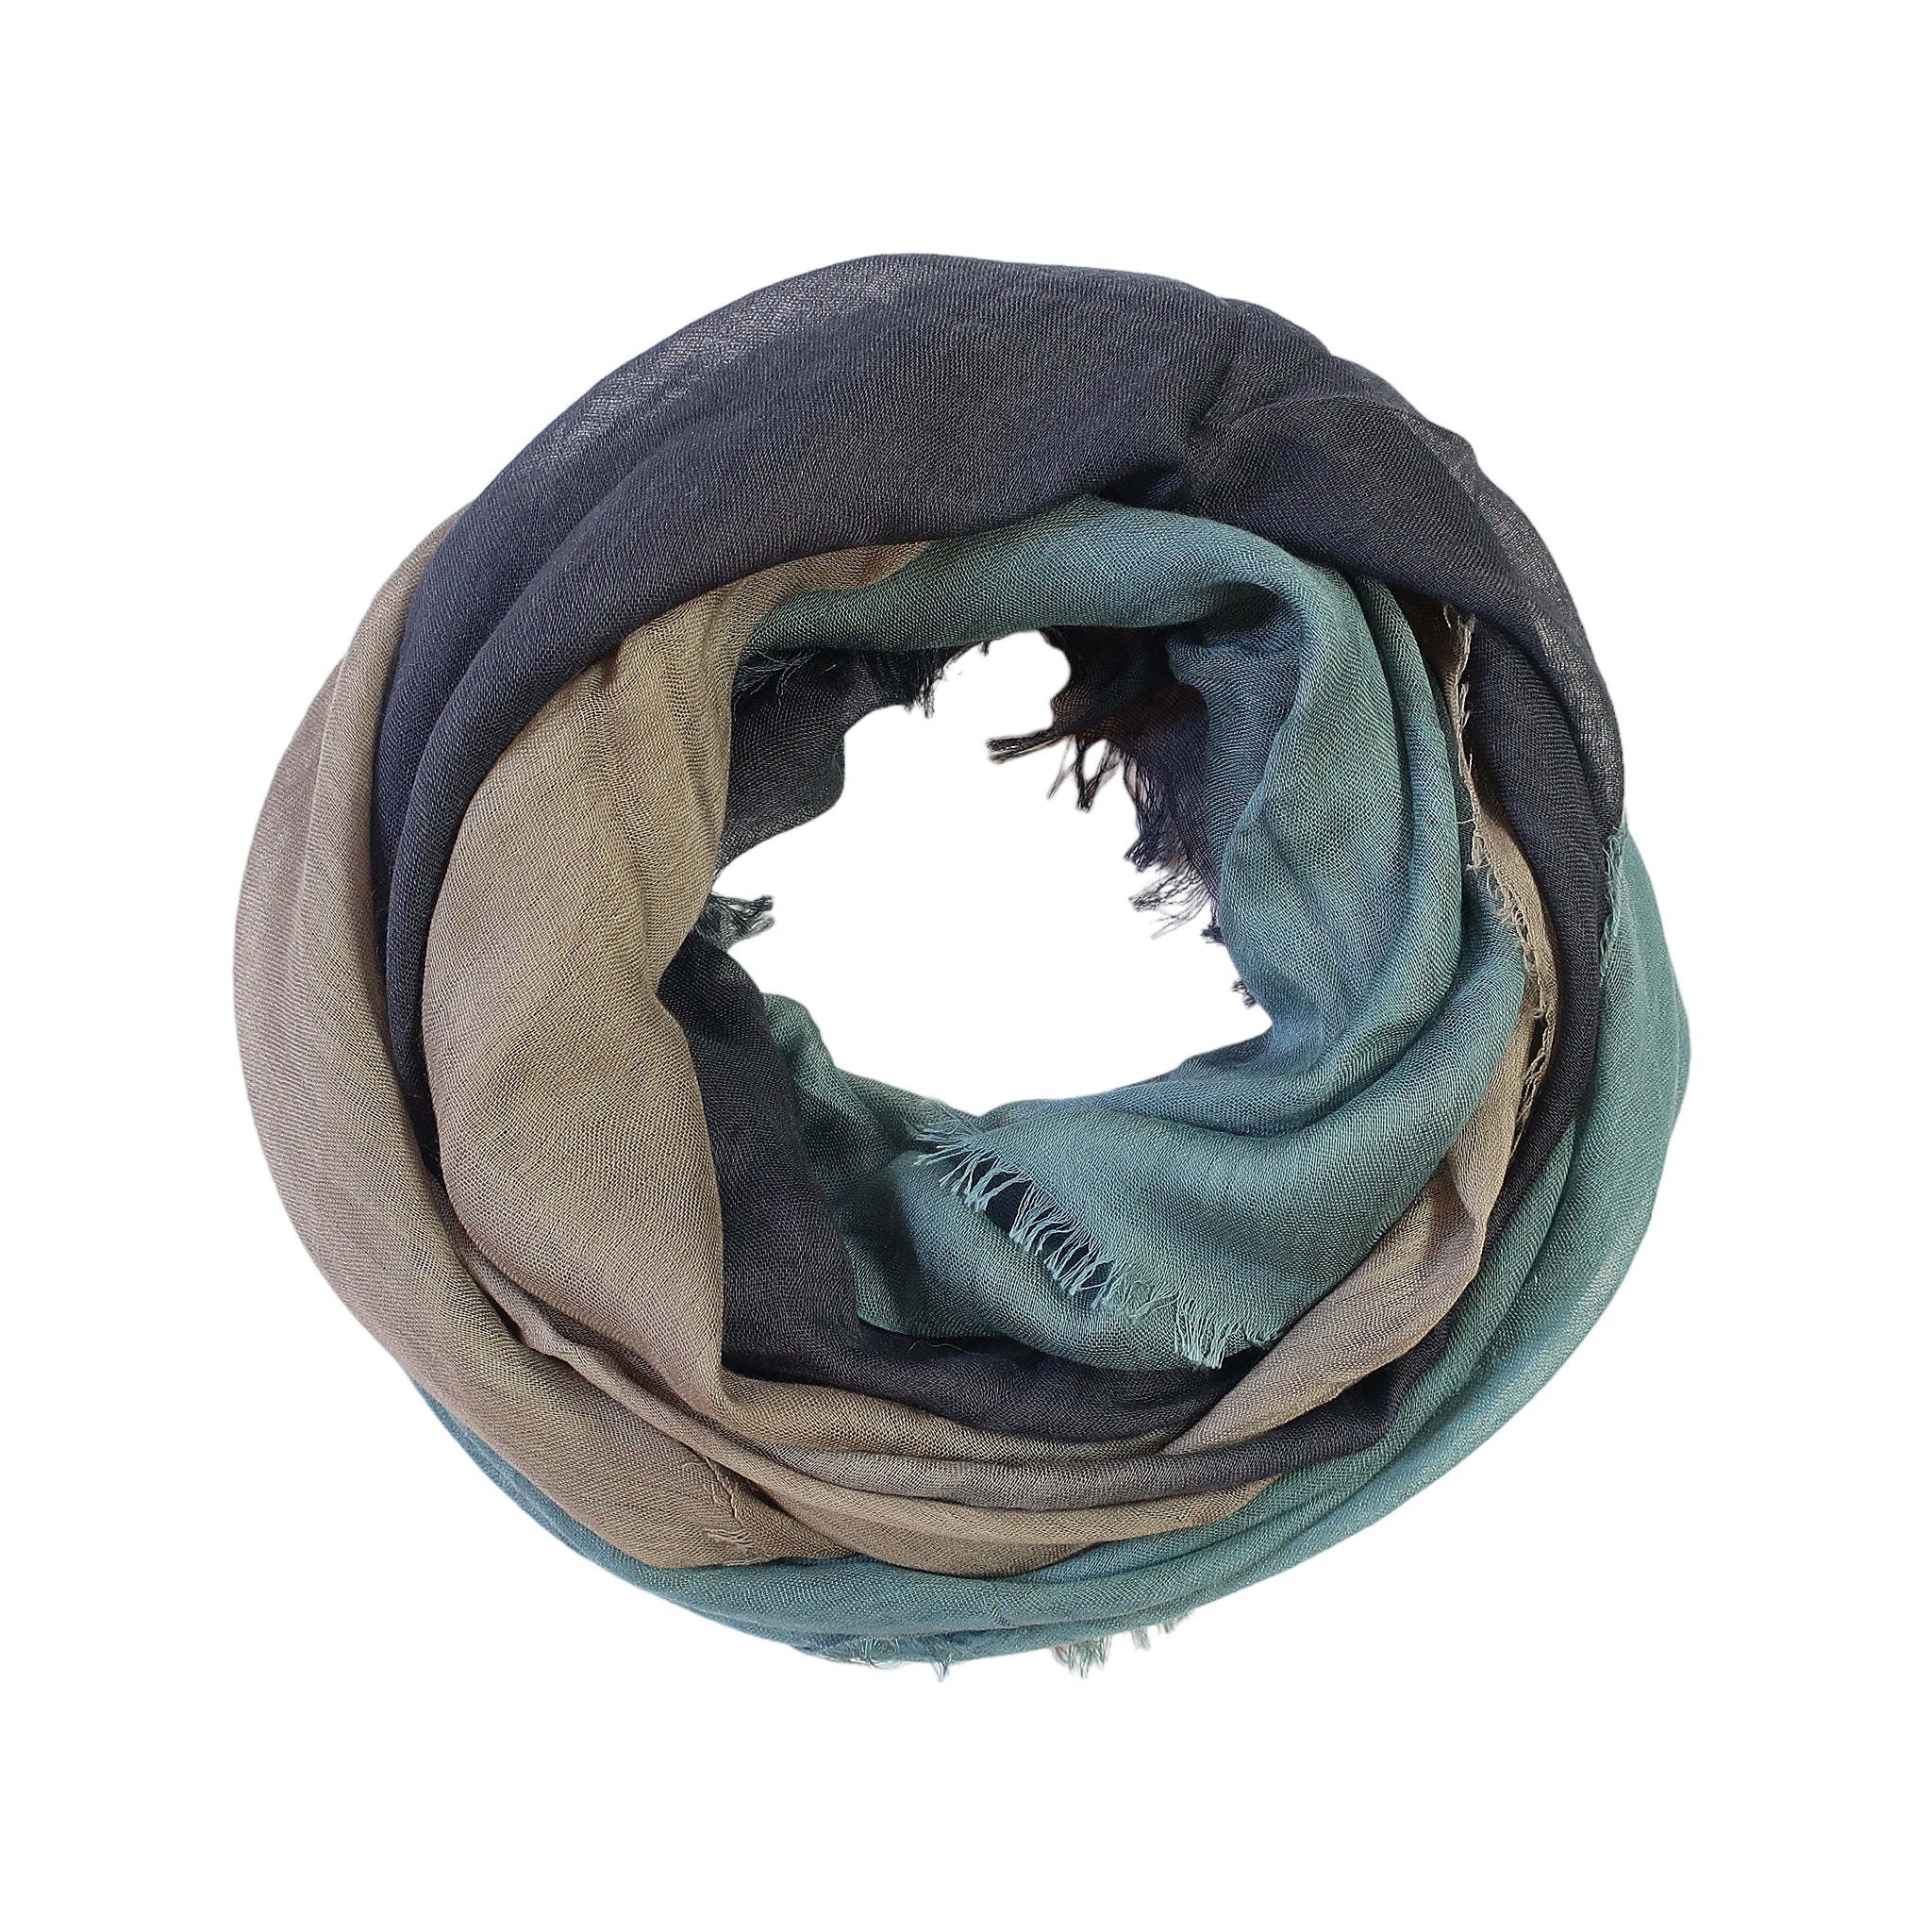 Blue Pacific Dream Cashmere and Silk Scarf in Denim and Olive 47 x 37